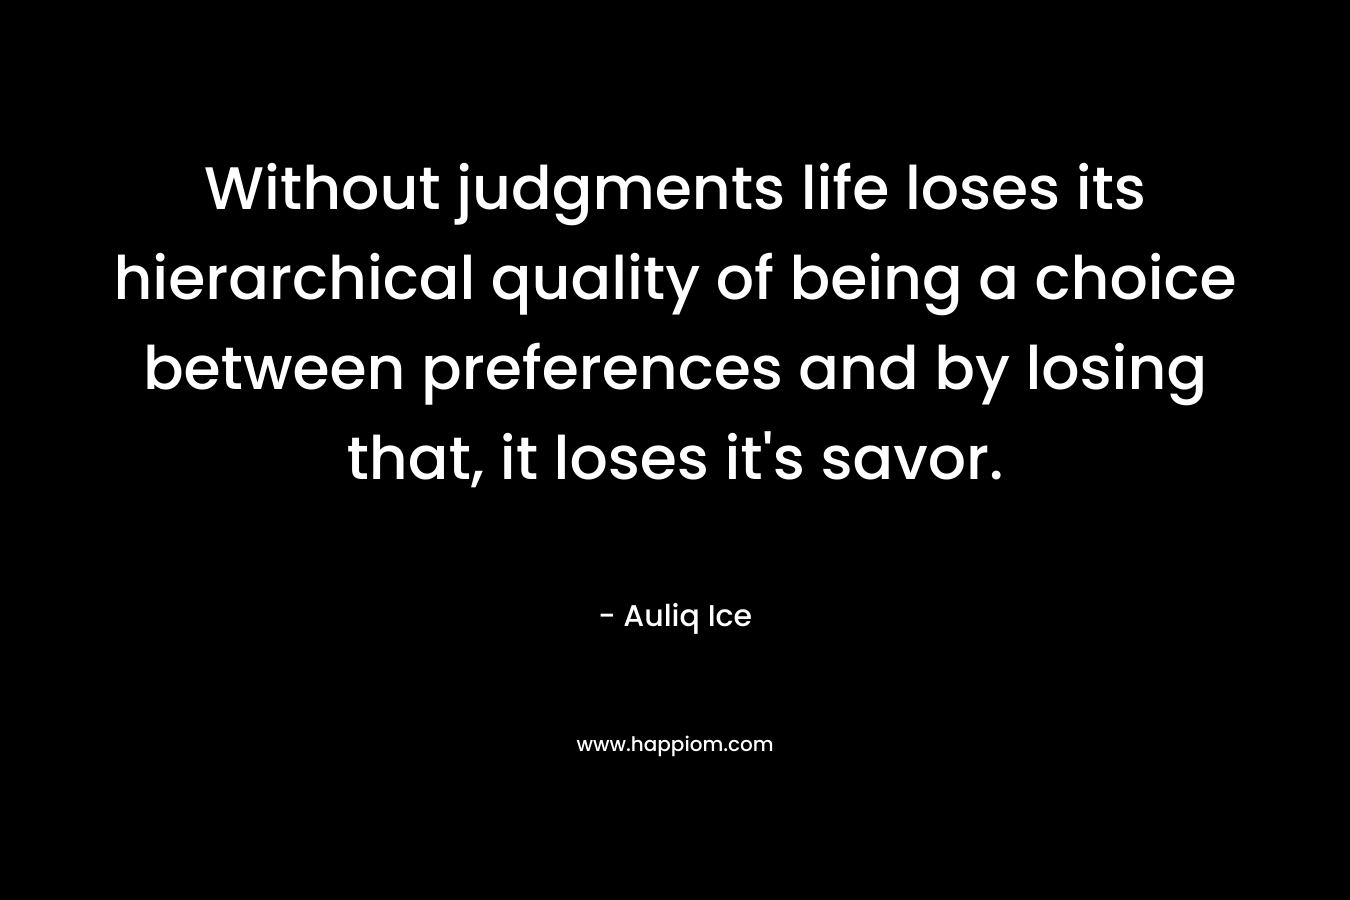 Without judgments life loses its hierarchical quality of being a choice between preferences and by losing that, it loses it’s savor. – Auliq Ice